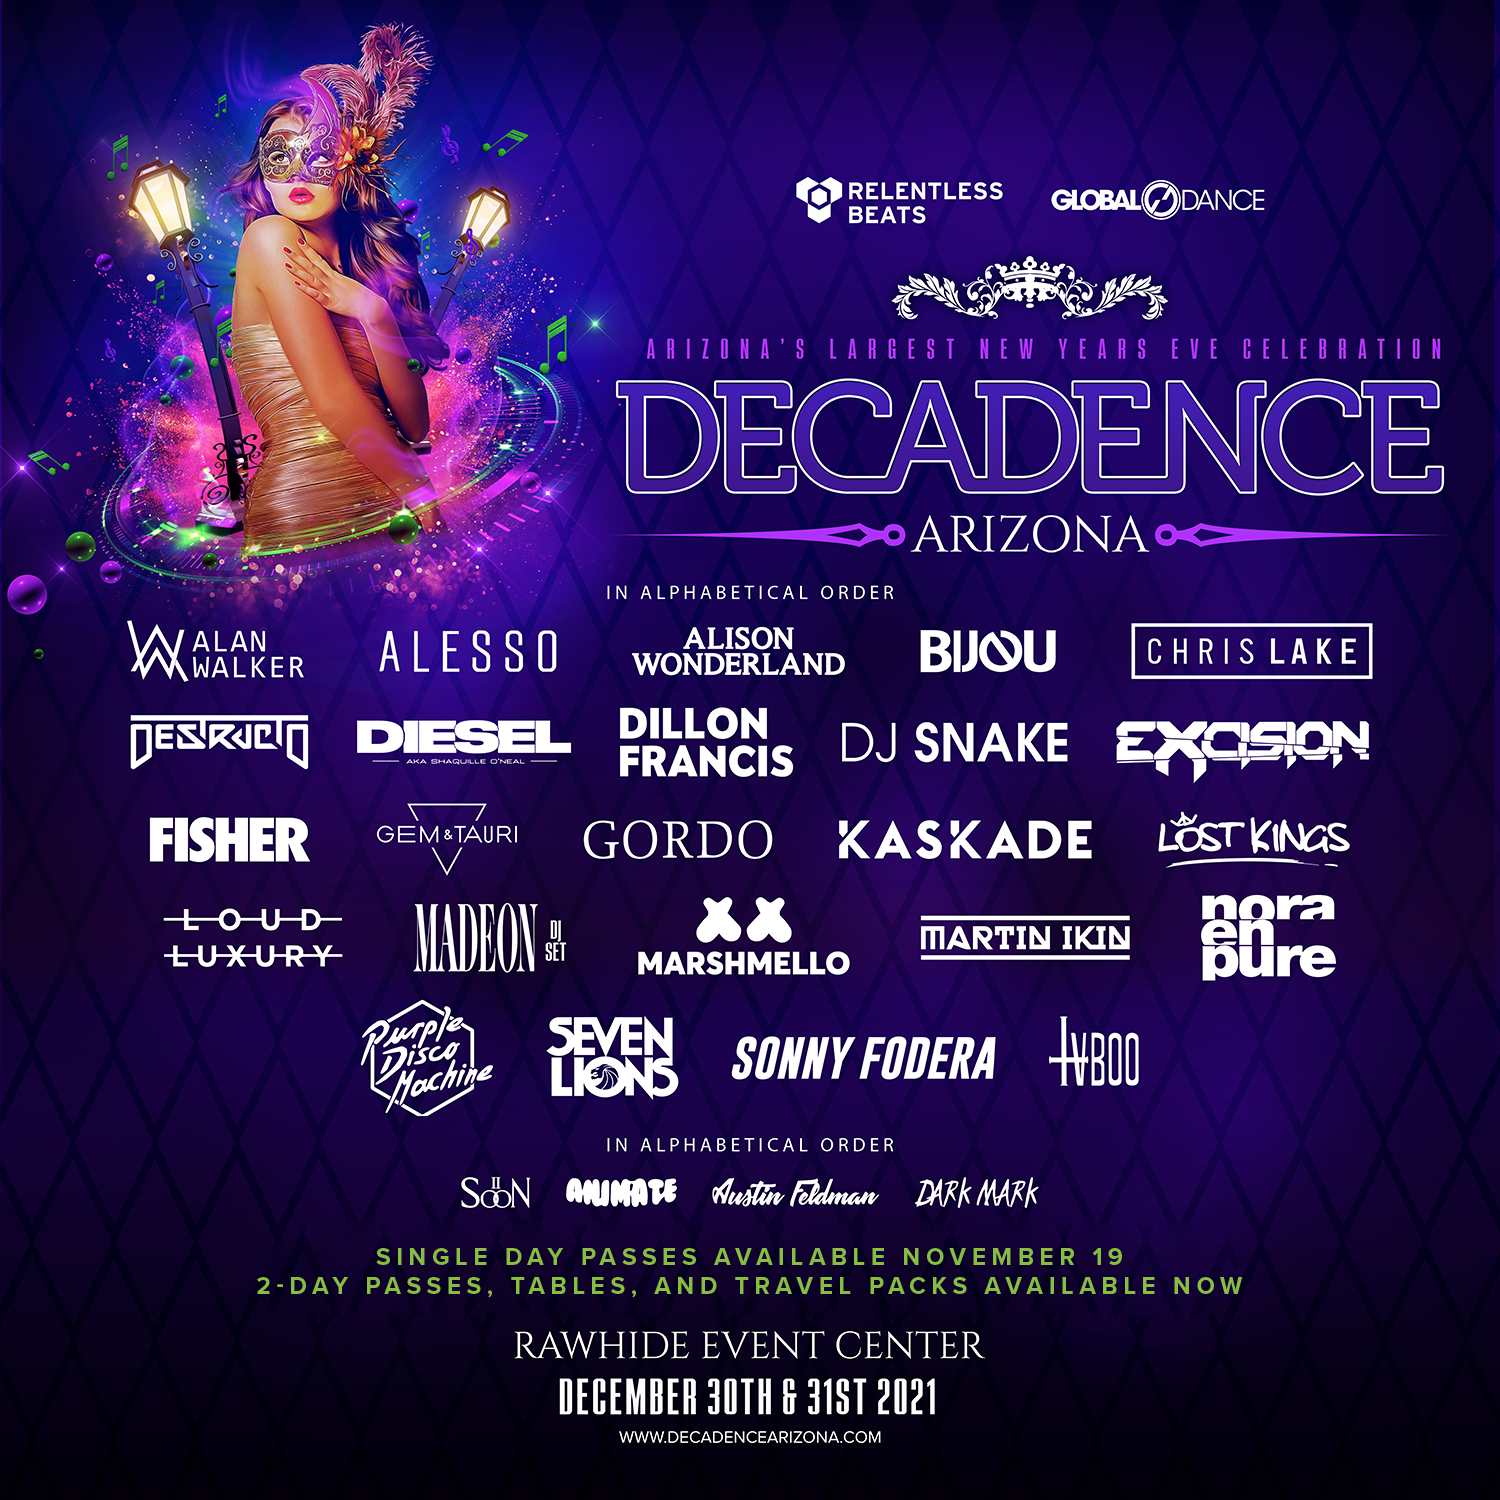 Get NYE Ready with The Official Decadence Arizona 2021 Playlist